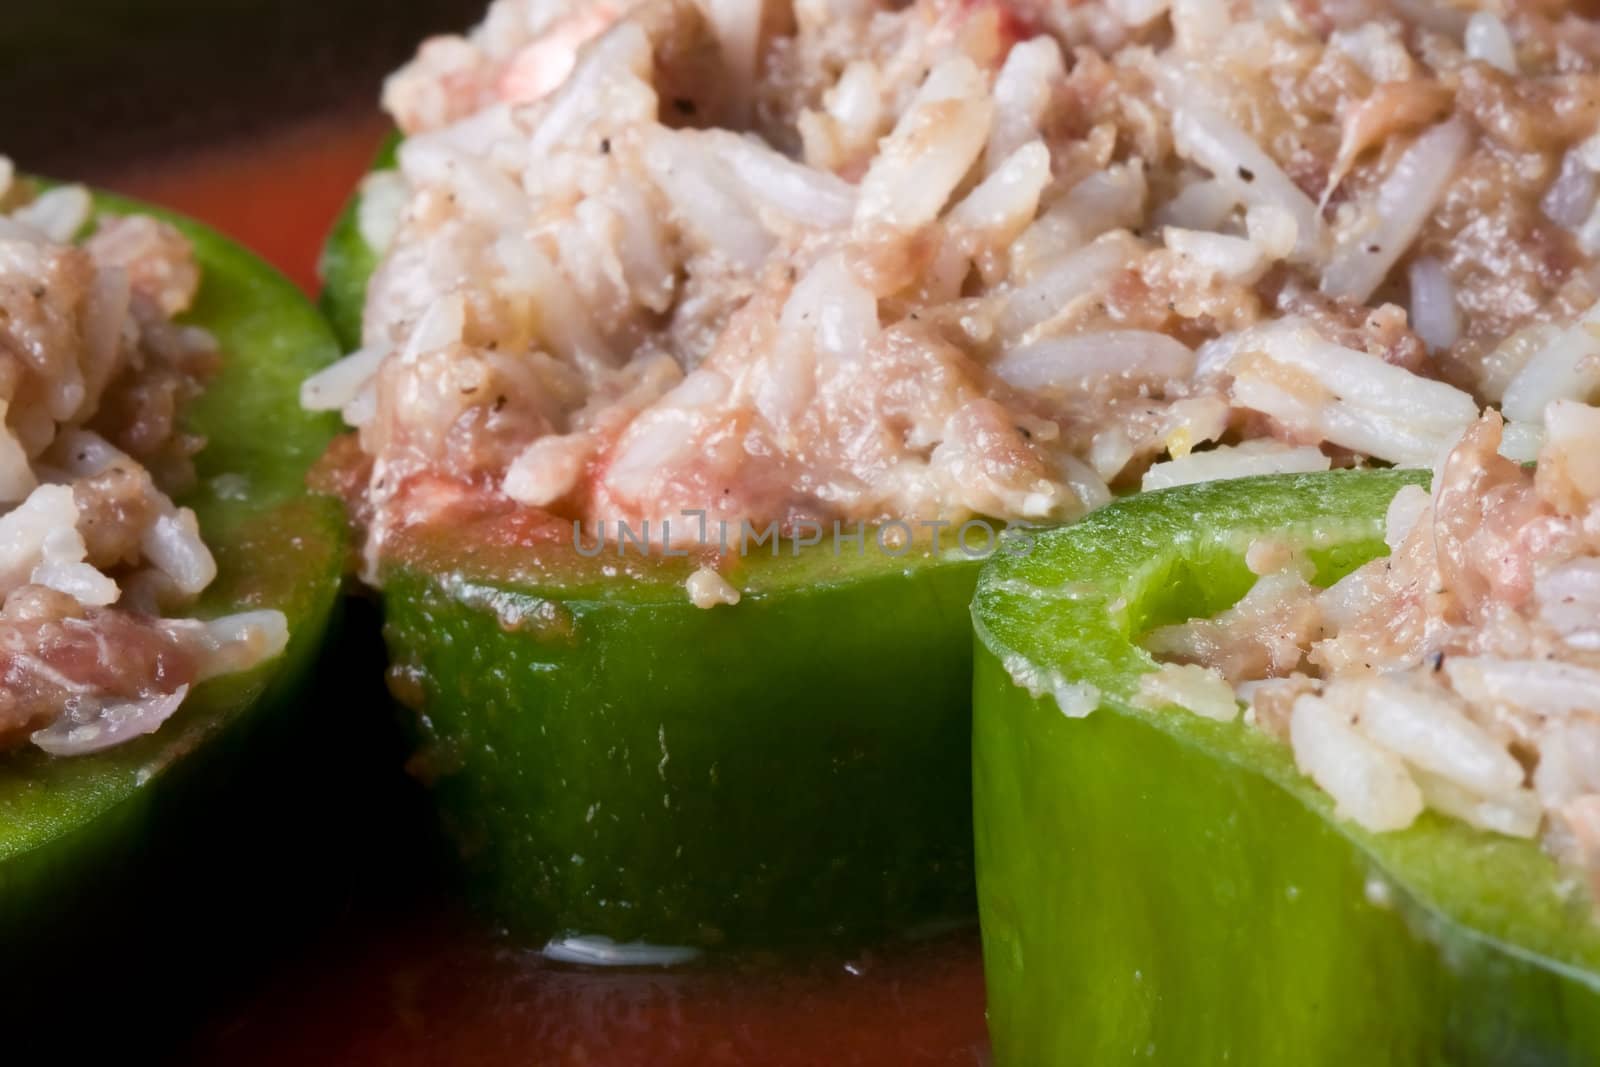 stuffed peppers by snokid